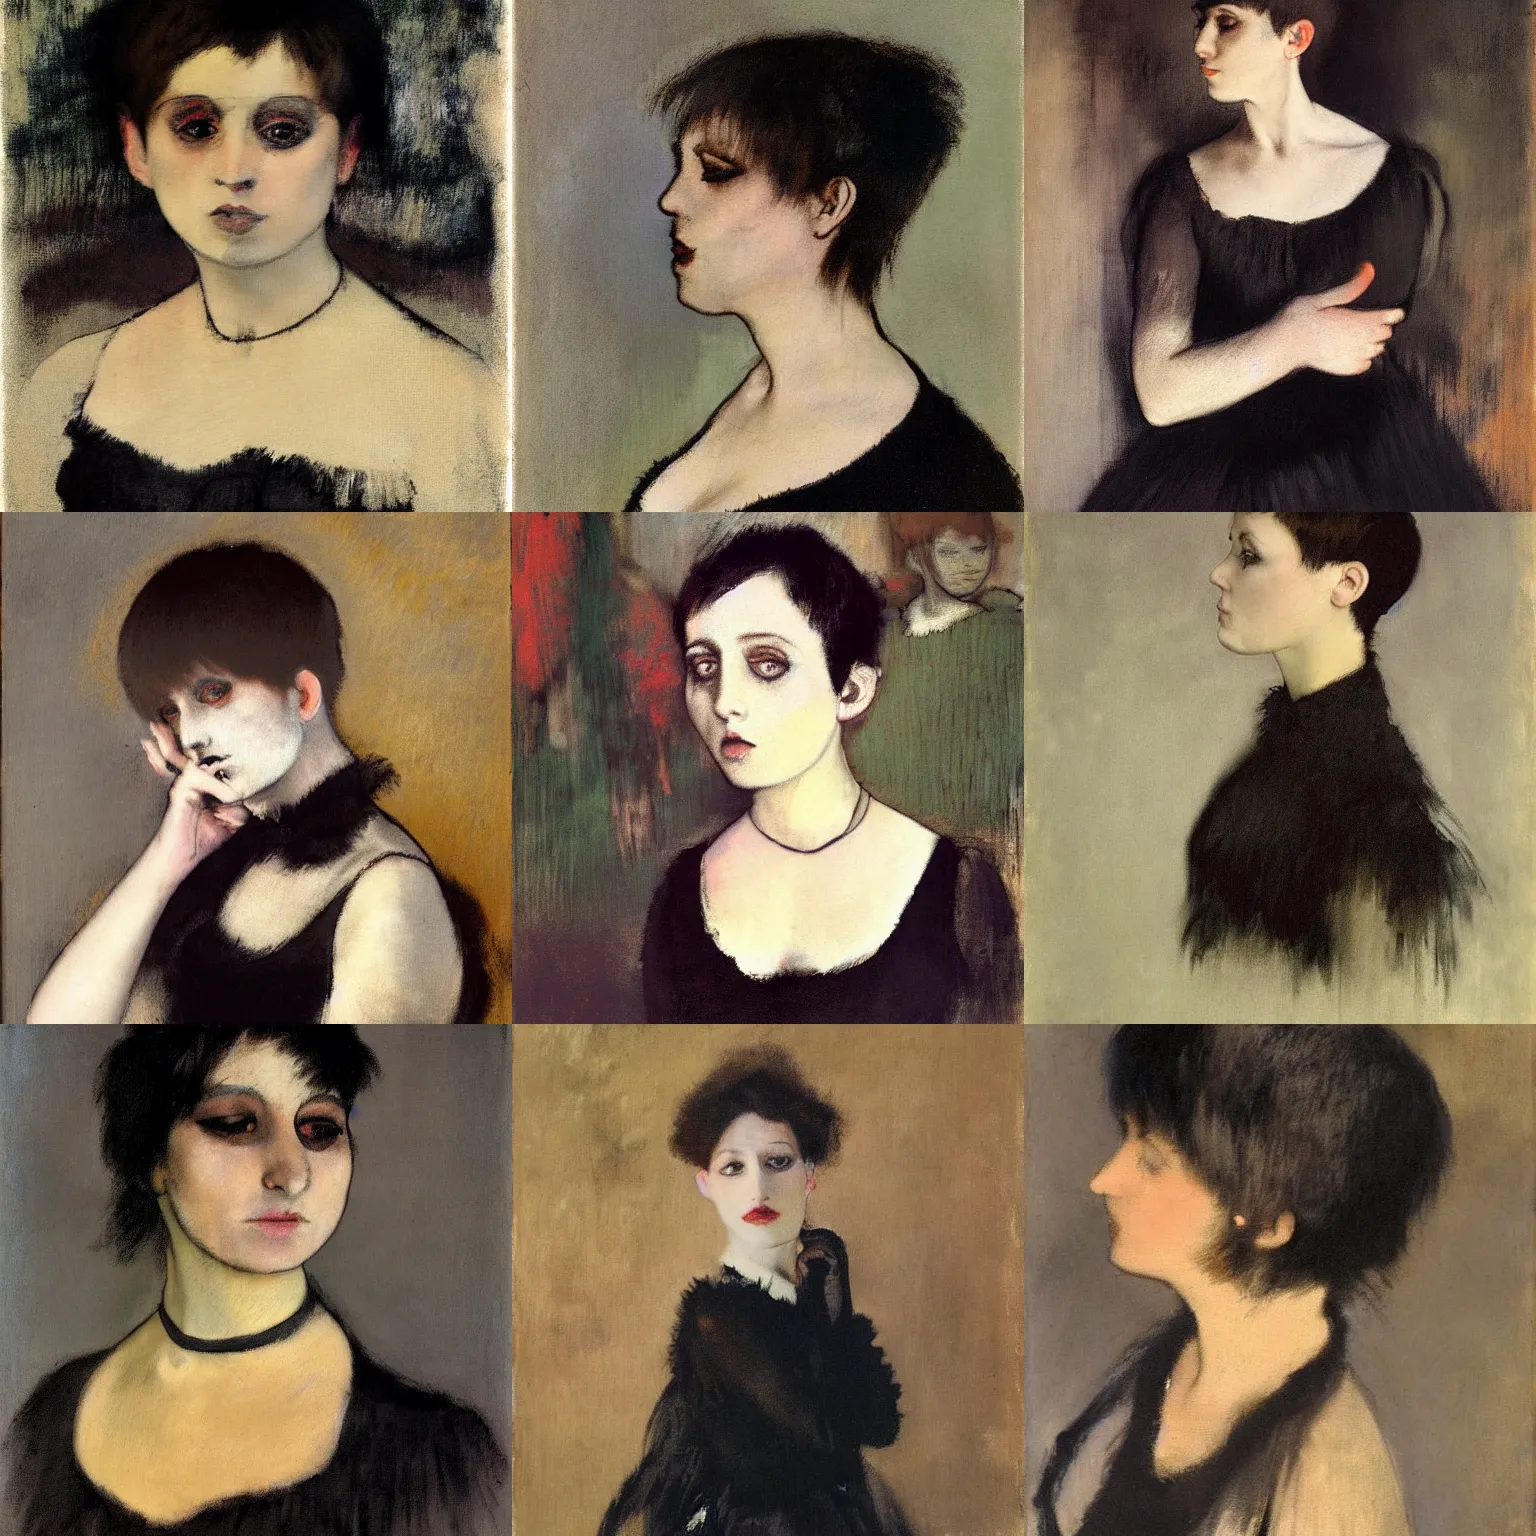 Prompt: A goth portrait painted by Edgar Degas. Her hair is dark brown and cut into a short, messy pixie cut. She has a slightly rounded face, with a pointed chin, large entirely-black eyes, and a small nose. She is wearing a black tank top, a black leather jacket, a black knee-length skirt, a black choker, and black leather boots.